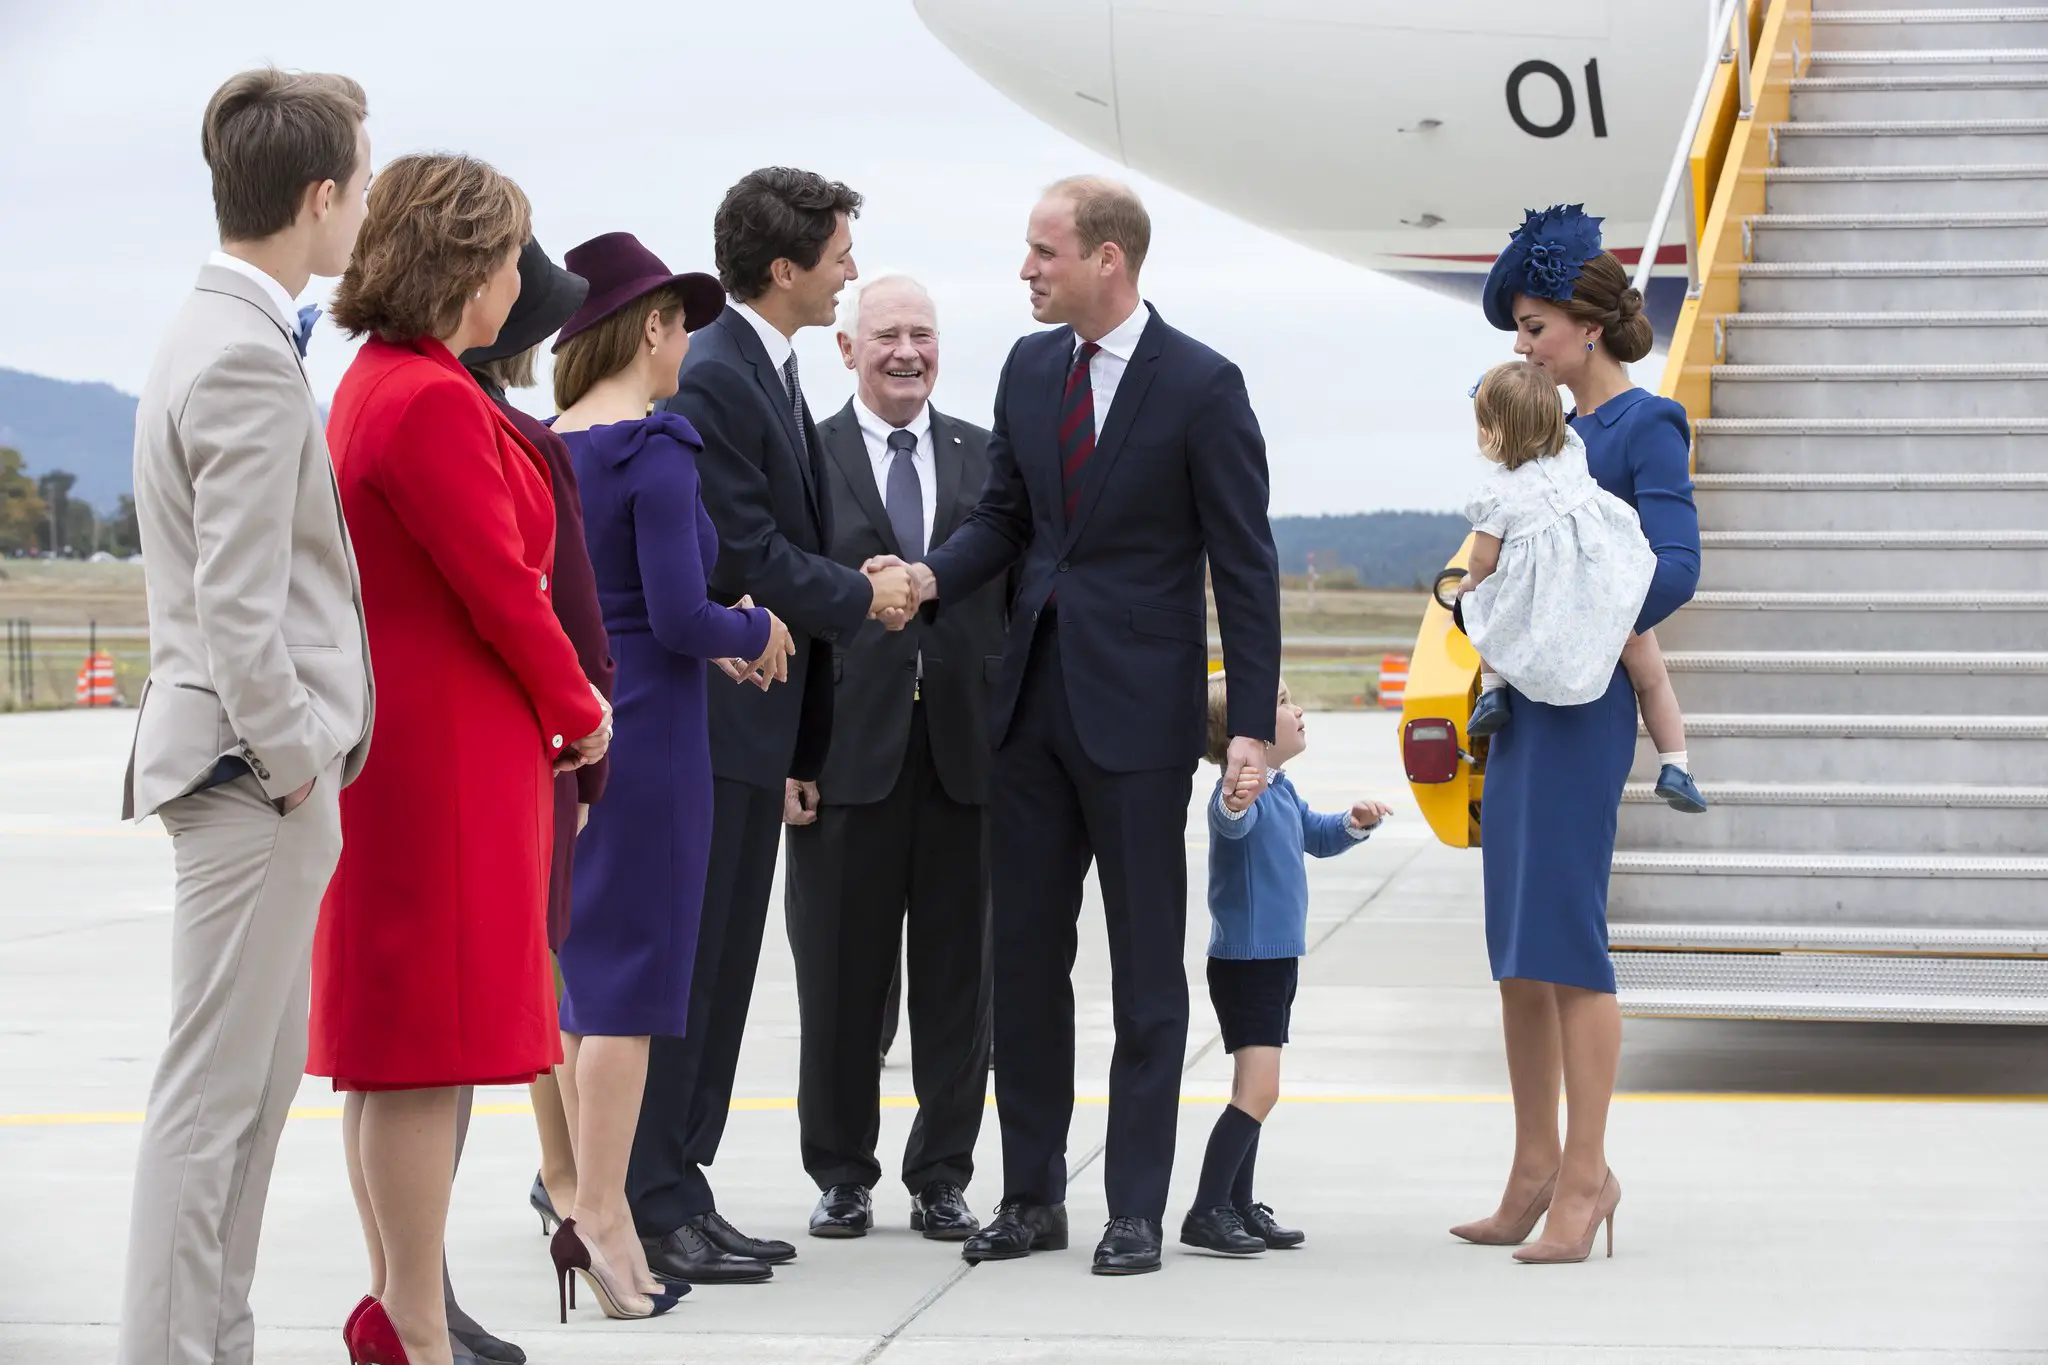 The Duke and Duchess of cambridge arrived in Canada for royal tour 2016